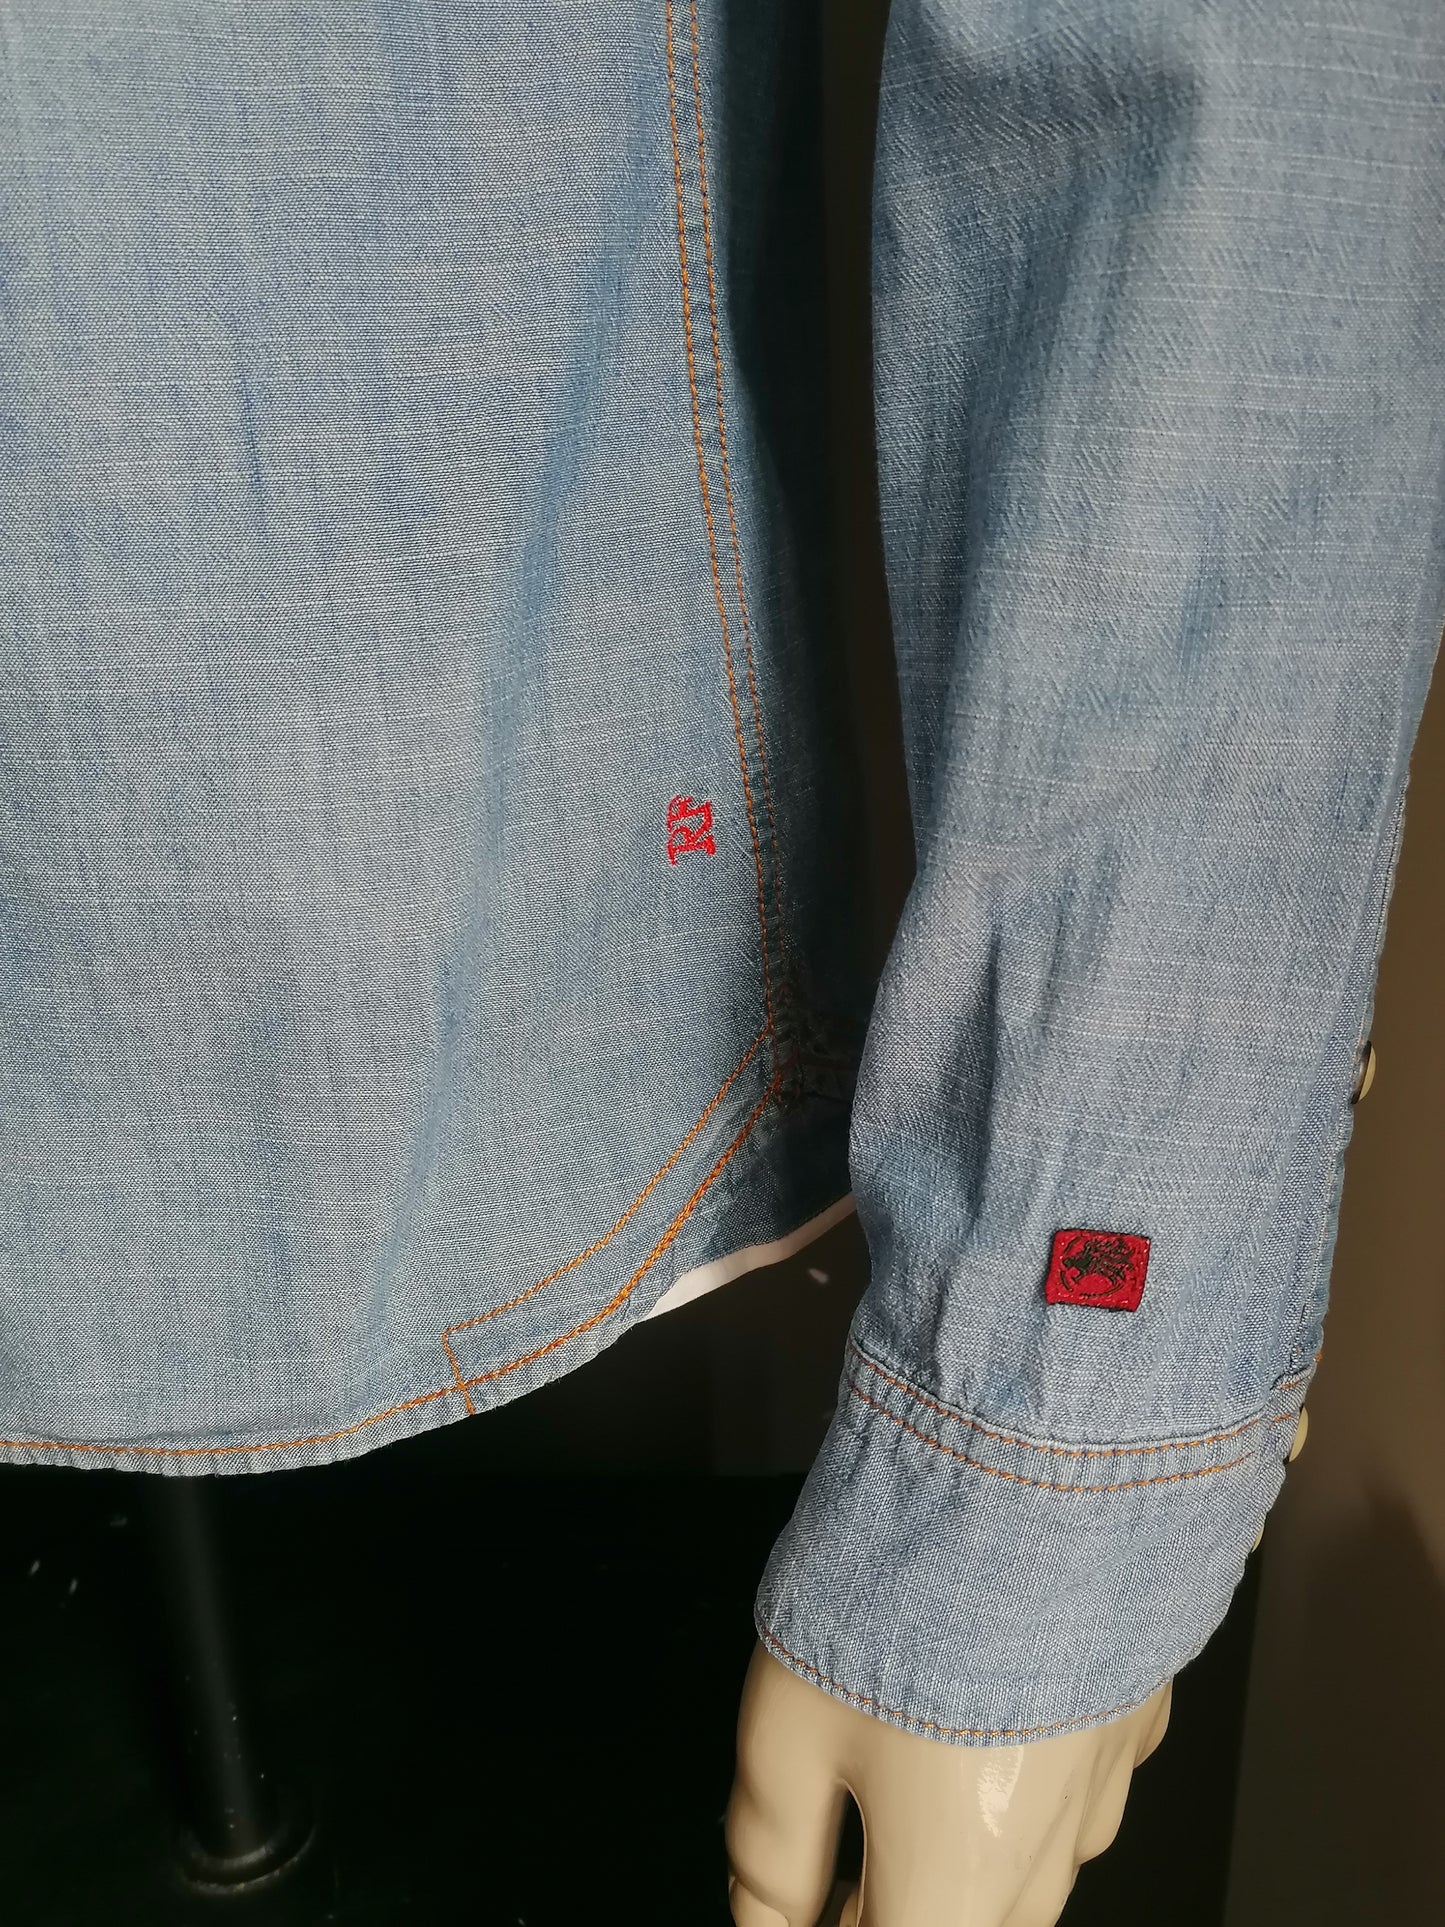 Refill jeans / denim shirt with press studs. Blue colored. Size L.